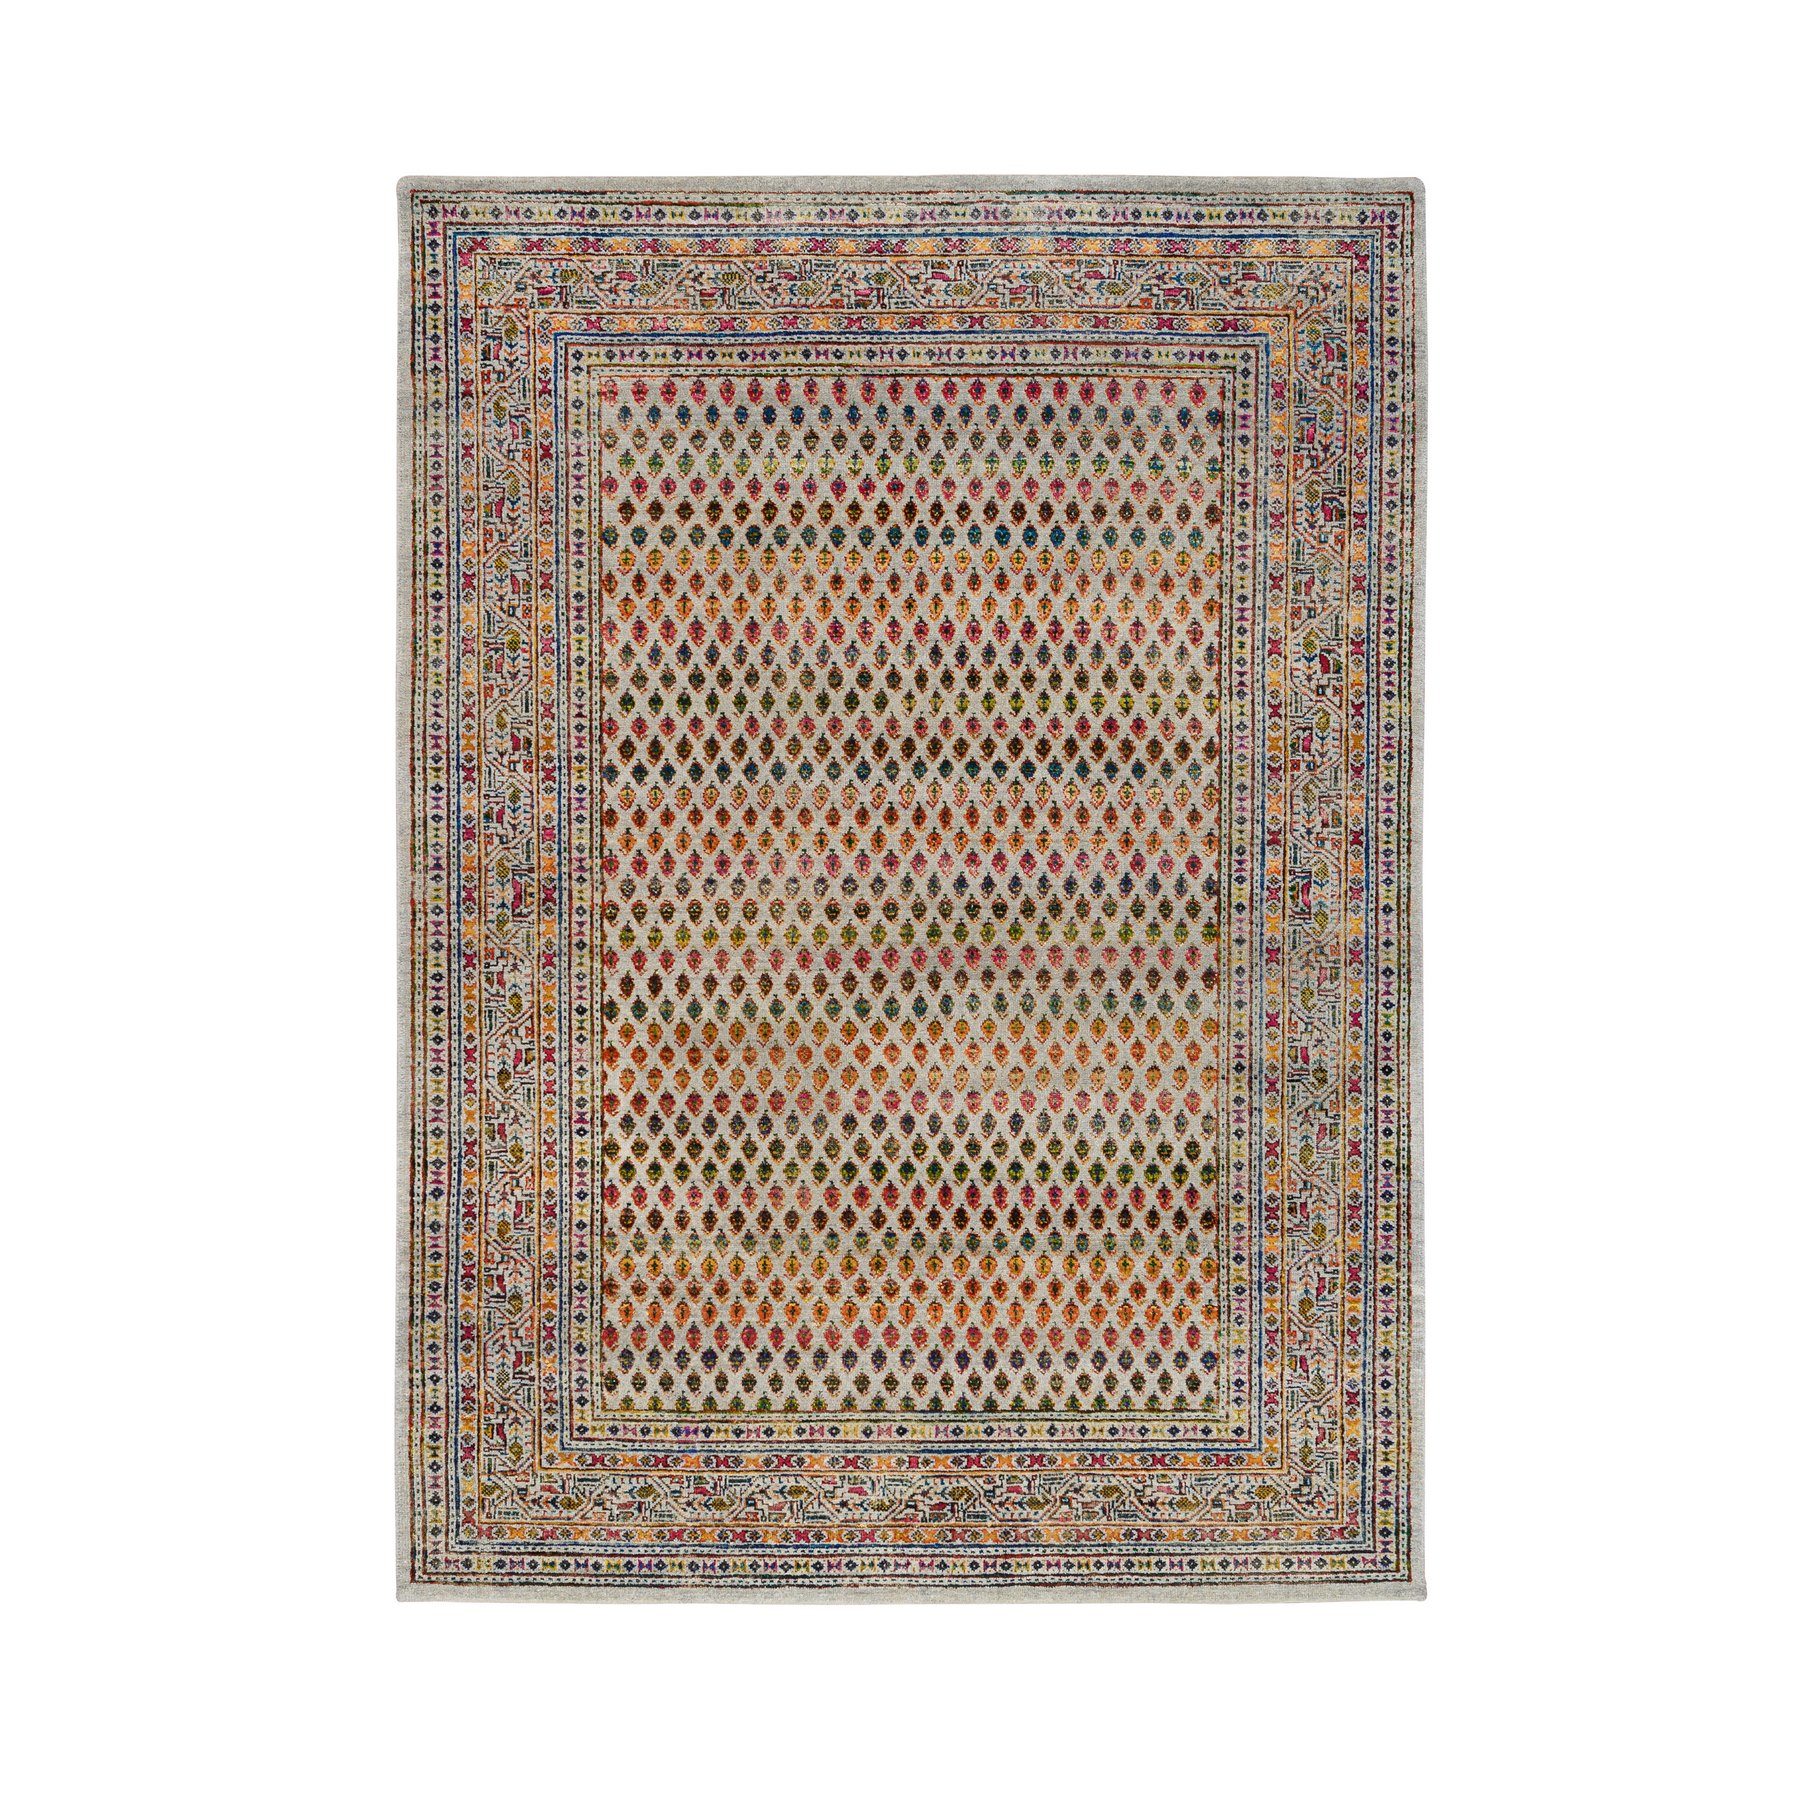 5'x7'1" Colorful Wool And Sari Silk Hand Woven Beige Sarouk Mir Inspired With Repetitive Boteh Design Oriental Rug 